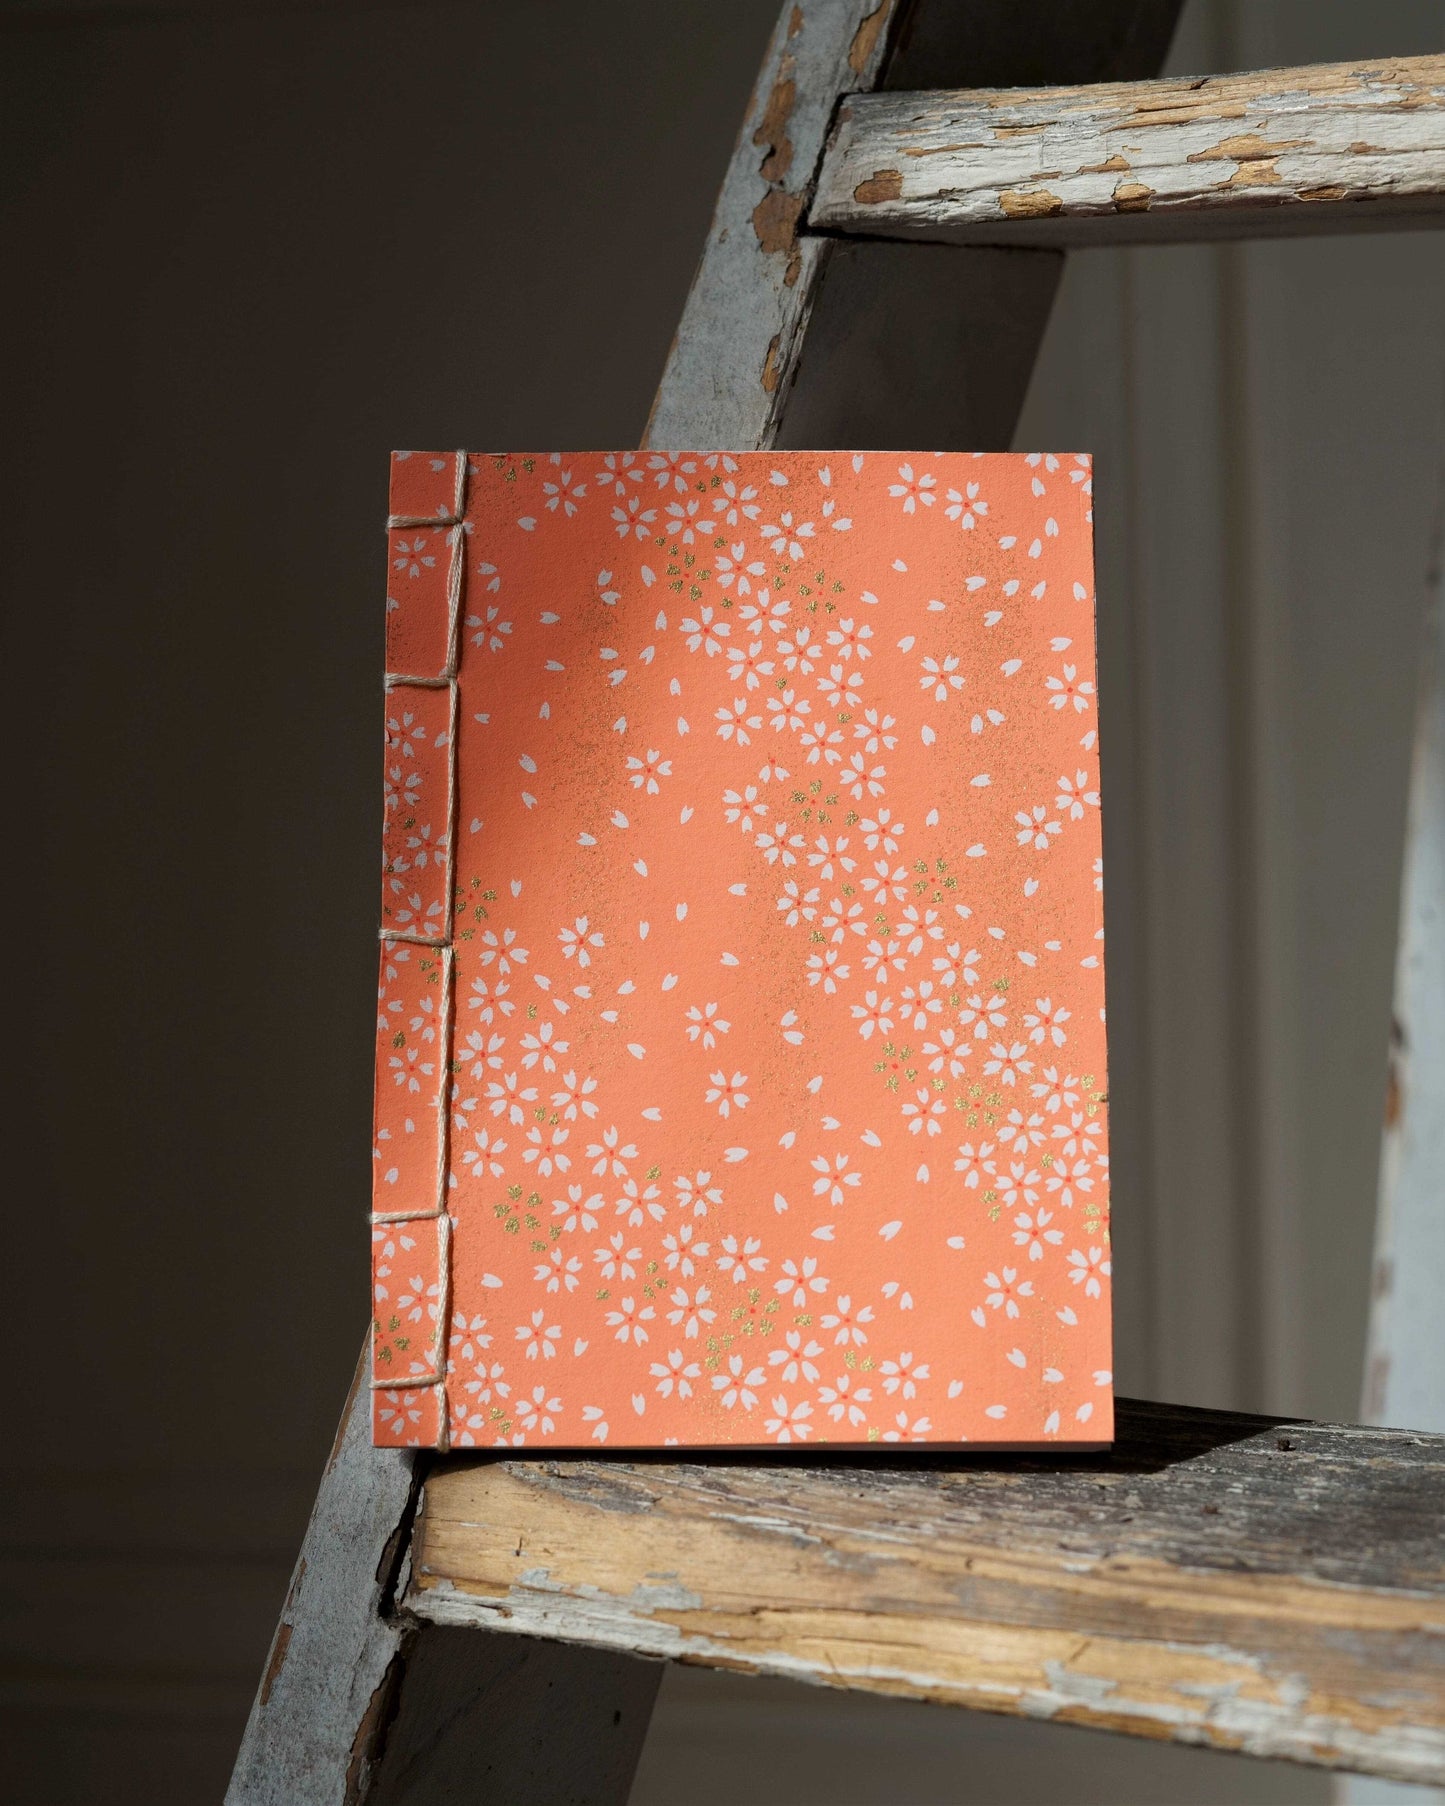 Small Japanese notebook - Coral